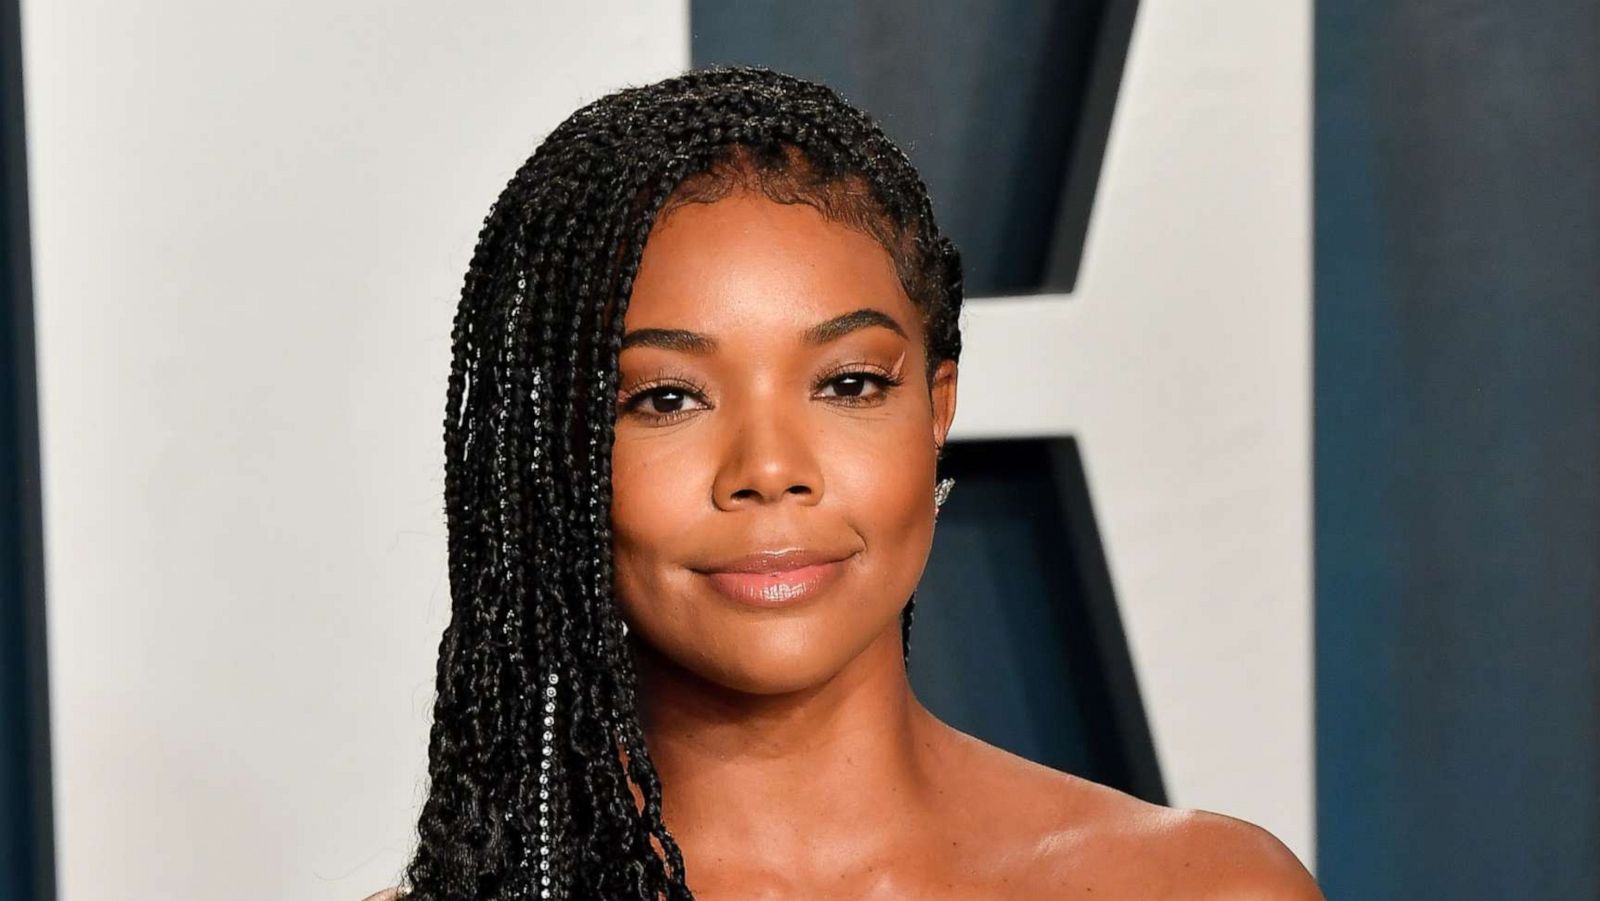 PHOTO: Gabrielle Union arrives at the 2020 Vanity Fair Oscar Party hosted by Radhika Jones at Wallis Annenberg Center for the Performing Arts on Feb. 09, 2020, in Beverly Hills, Calif.